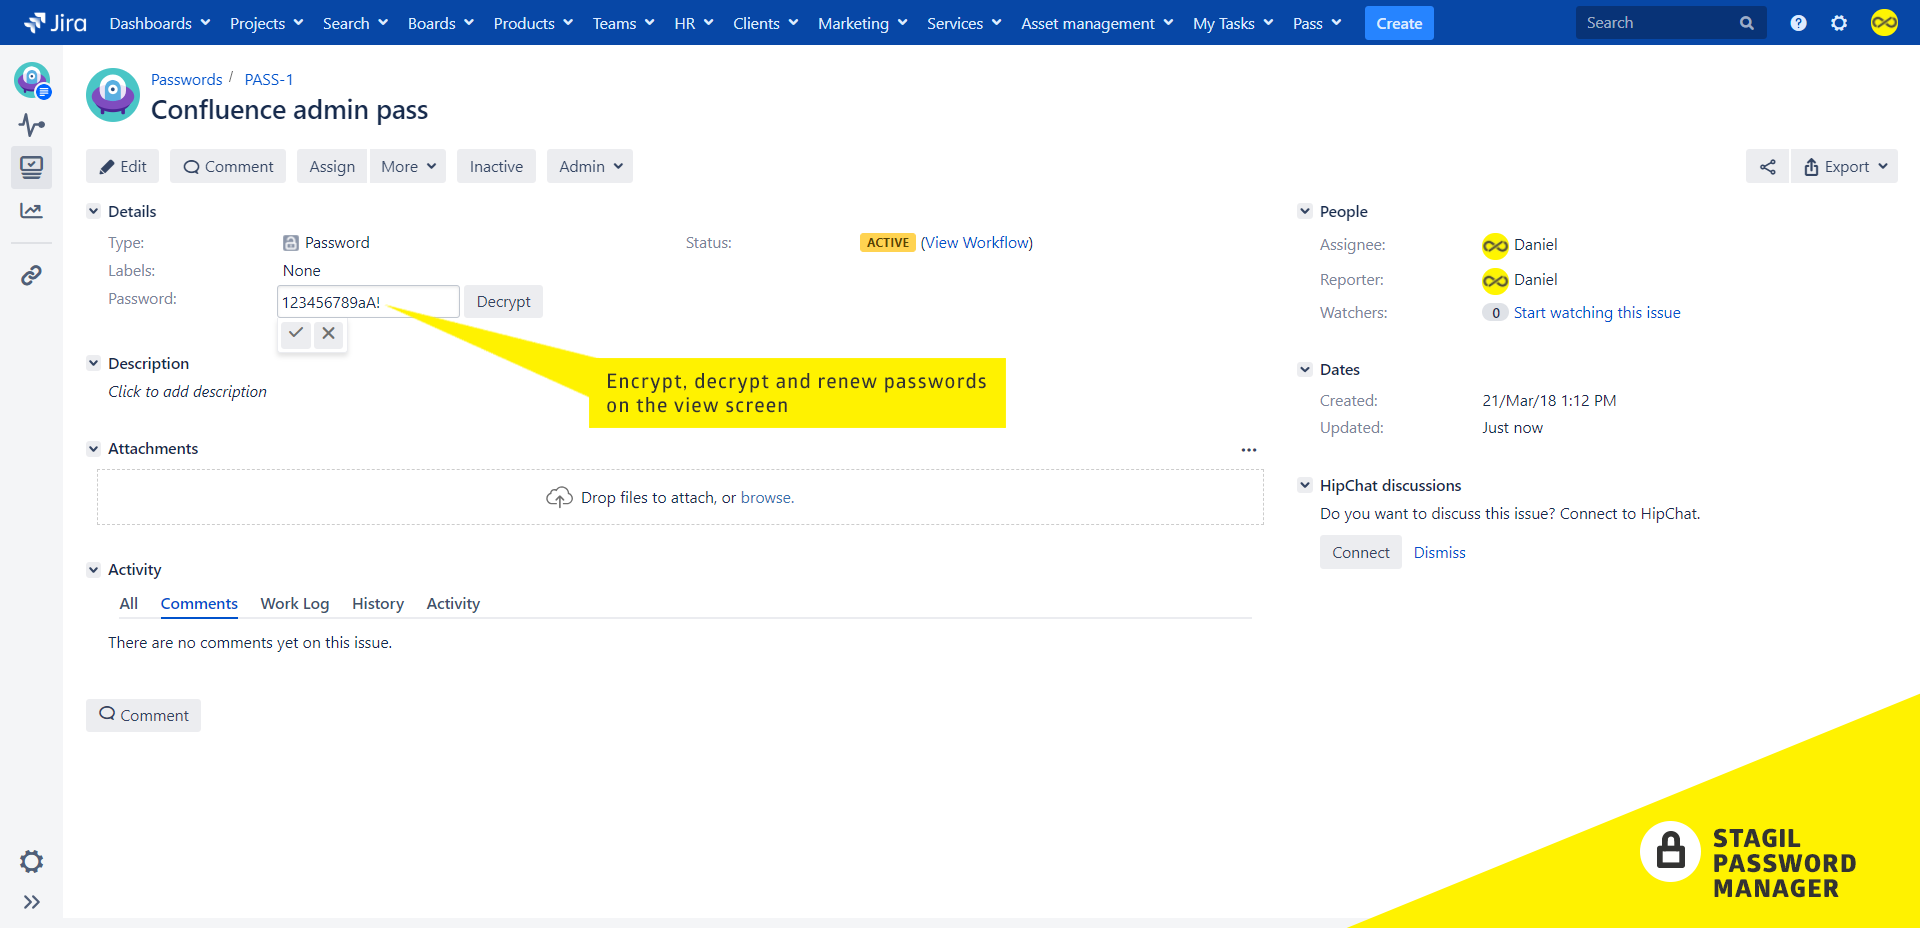 Use the power of Jira to manage your passwords